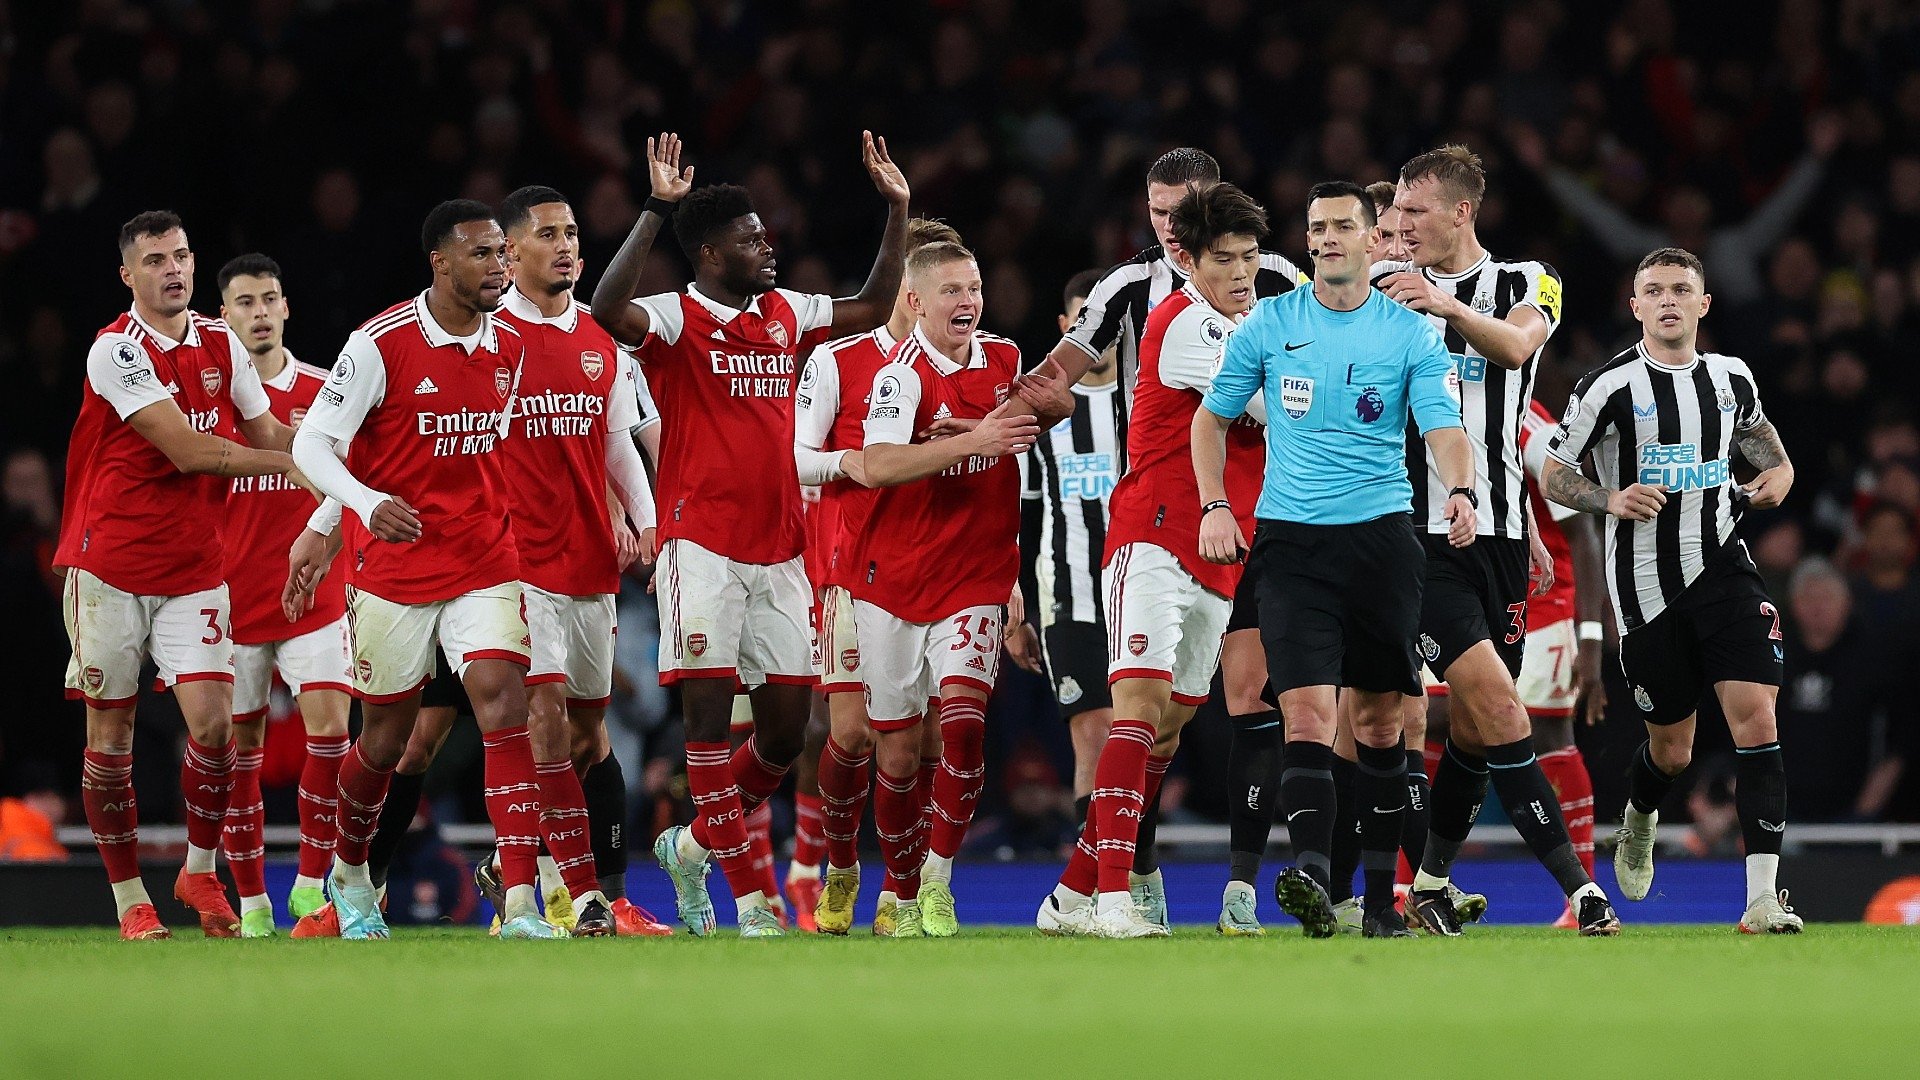 Arsenal hit by FA charge! Gunners set to be punished following 'disorderly' reaction to controversial Newcastle penalty incident. Goal.com US